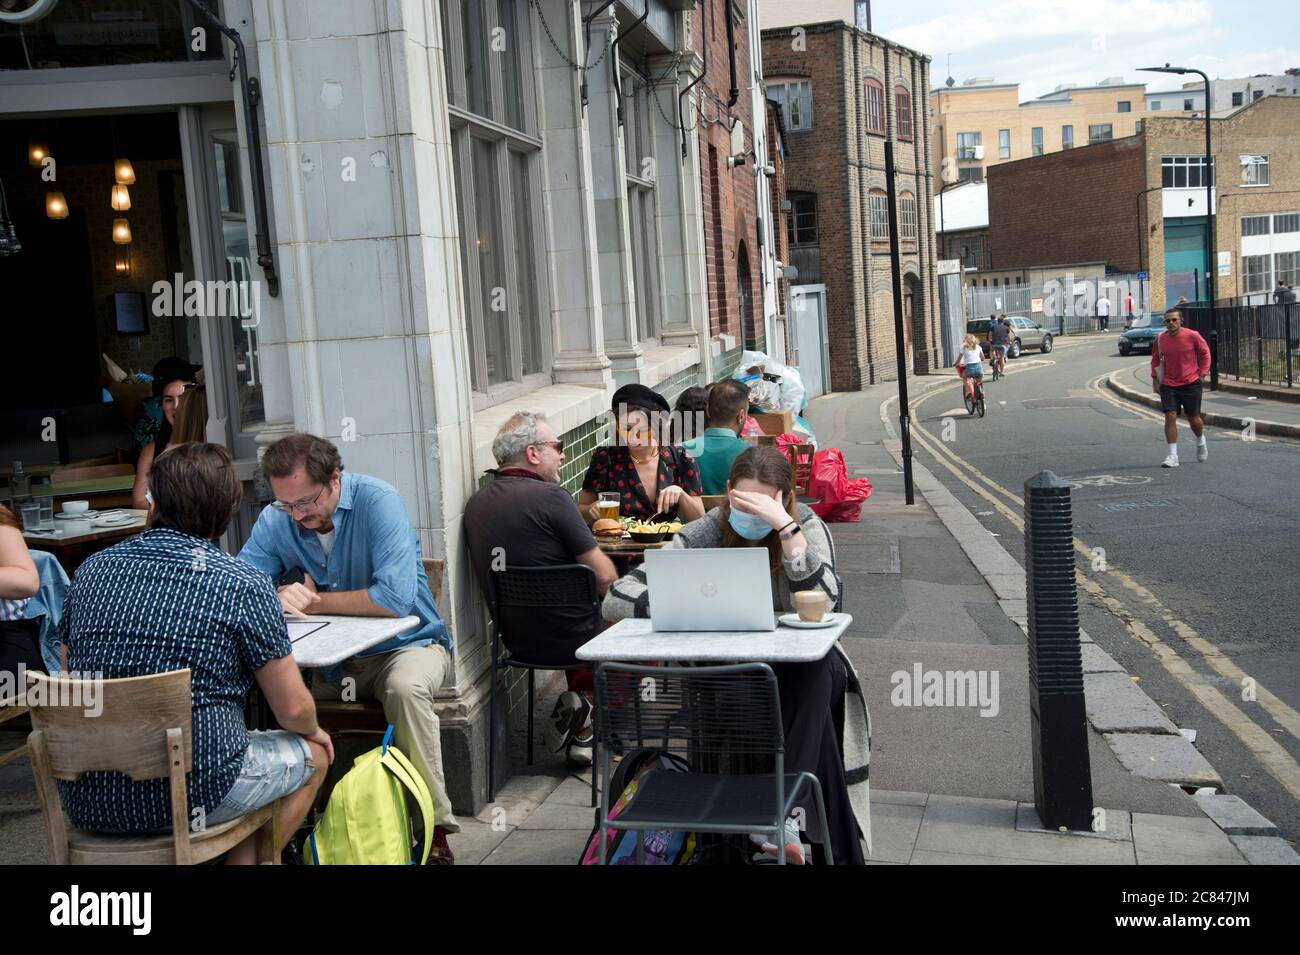 Hackney, London, UK. Broadway market. Reopened cafe with people sitting and working outside. Stock Photo